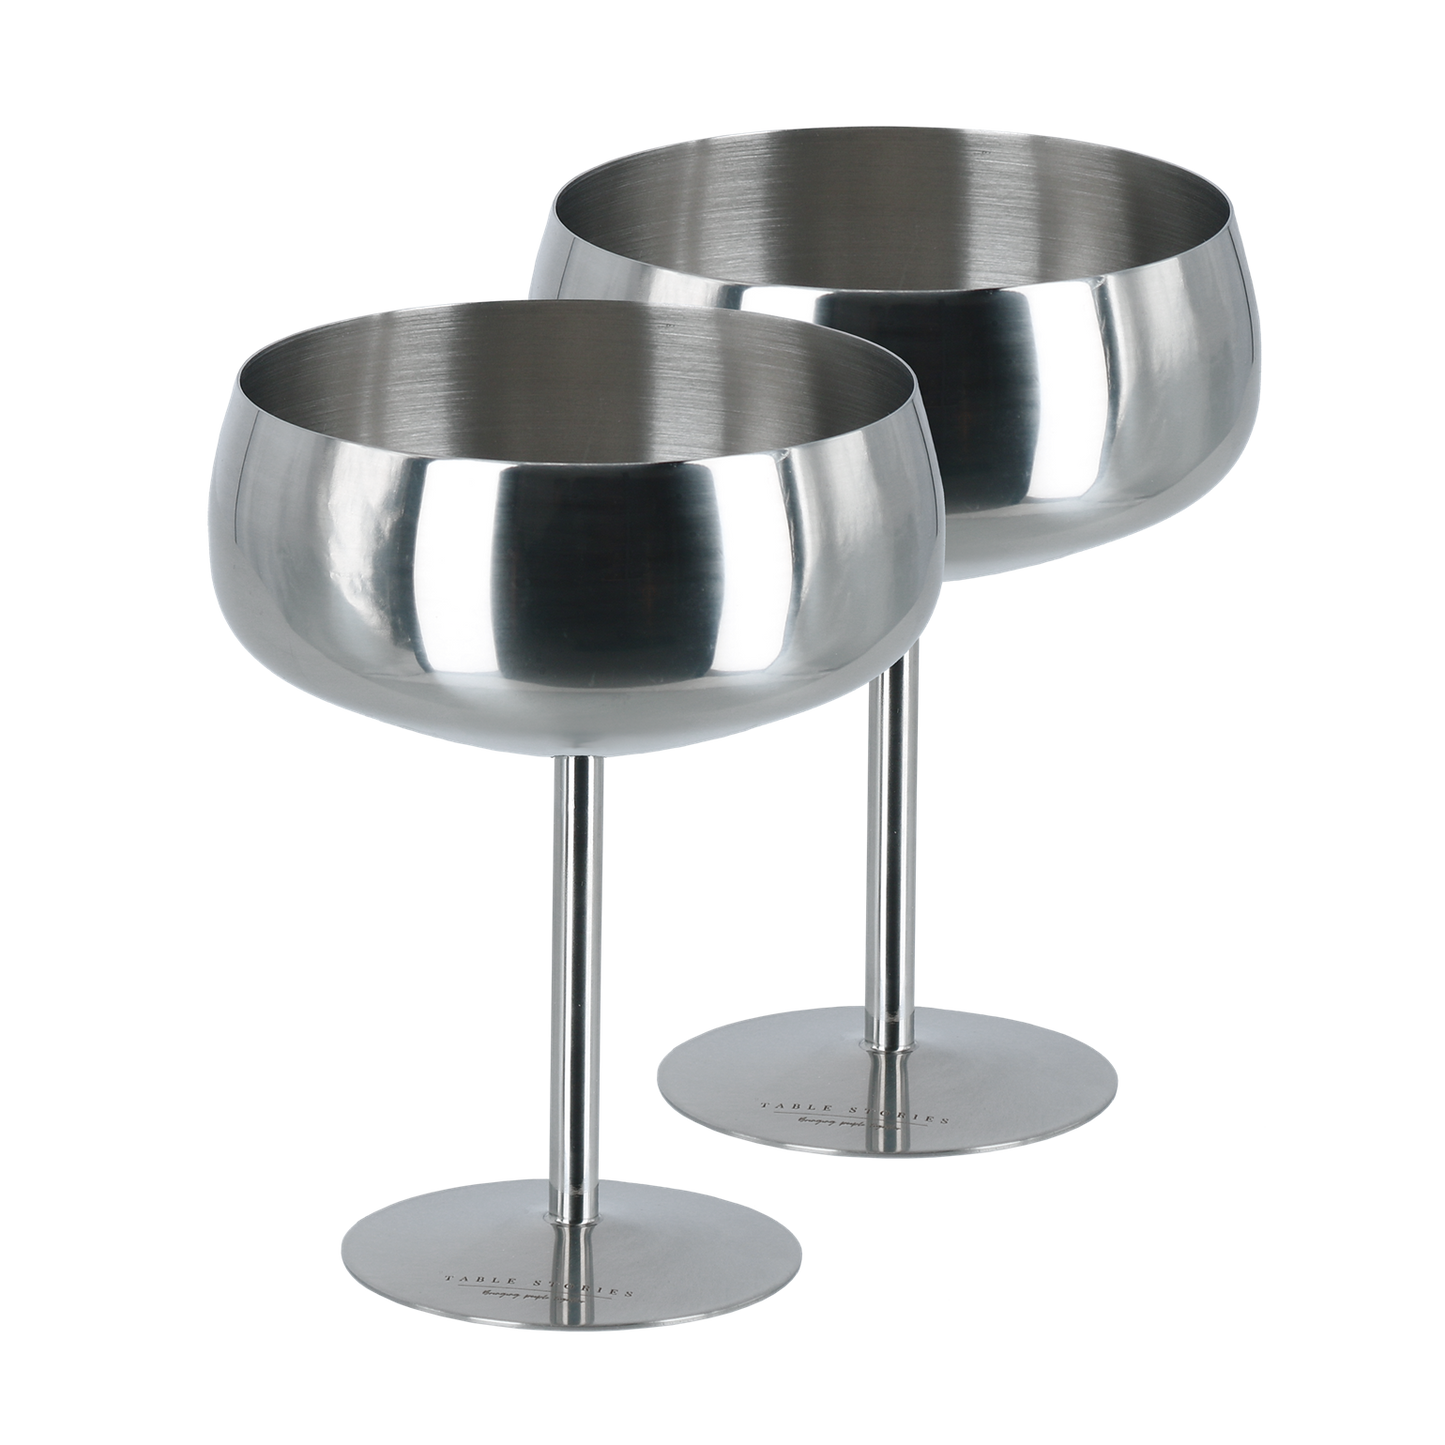 Table Stories Stainless Steel Cocktailglass 2 pk - Silver